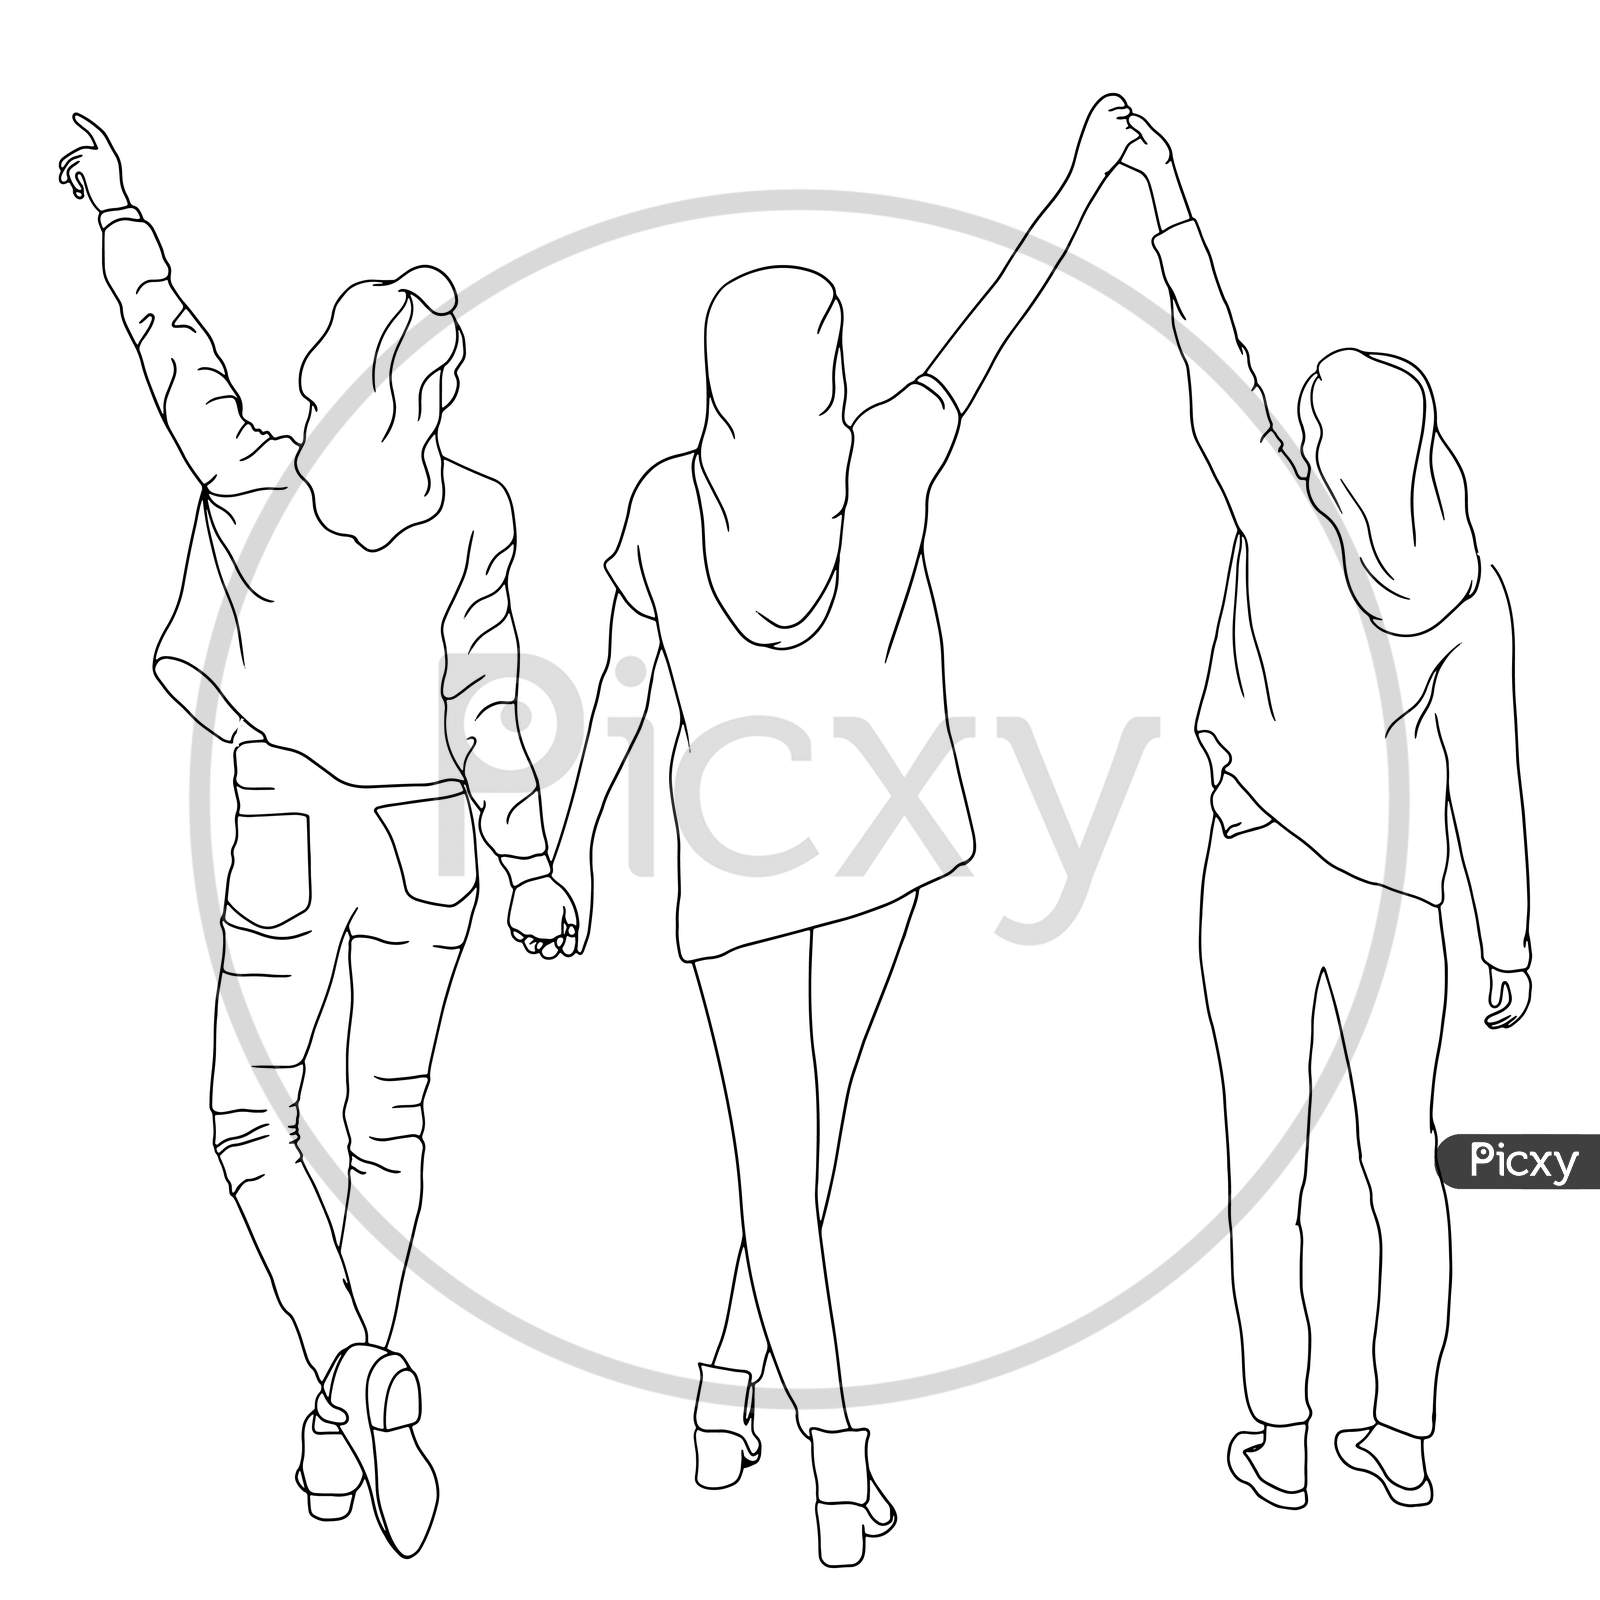 Coloring Pages - Three Girls Weaving Hands In The Air, Drawn From The Backside, Flat Colorful Illustration Of People For Friendship Day. Hand-Drawn Character Illustration Of Happy People.